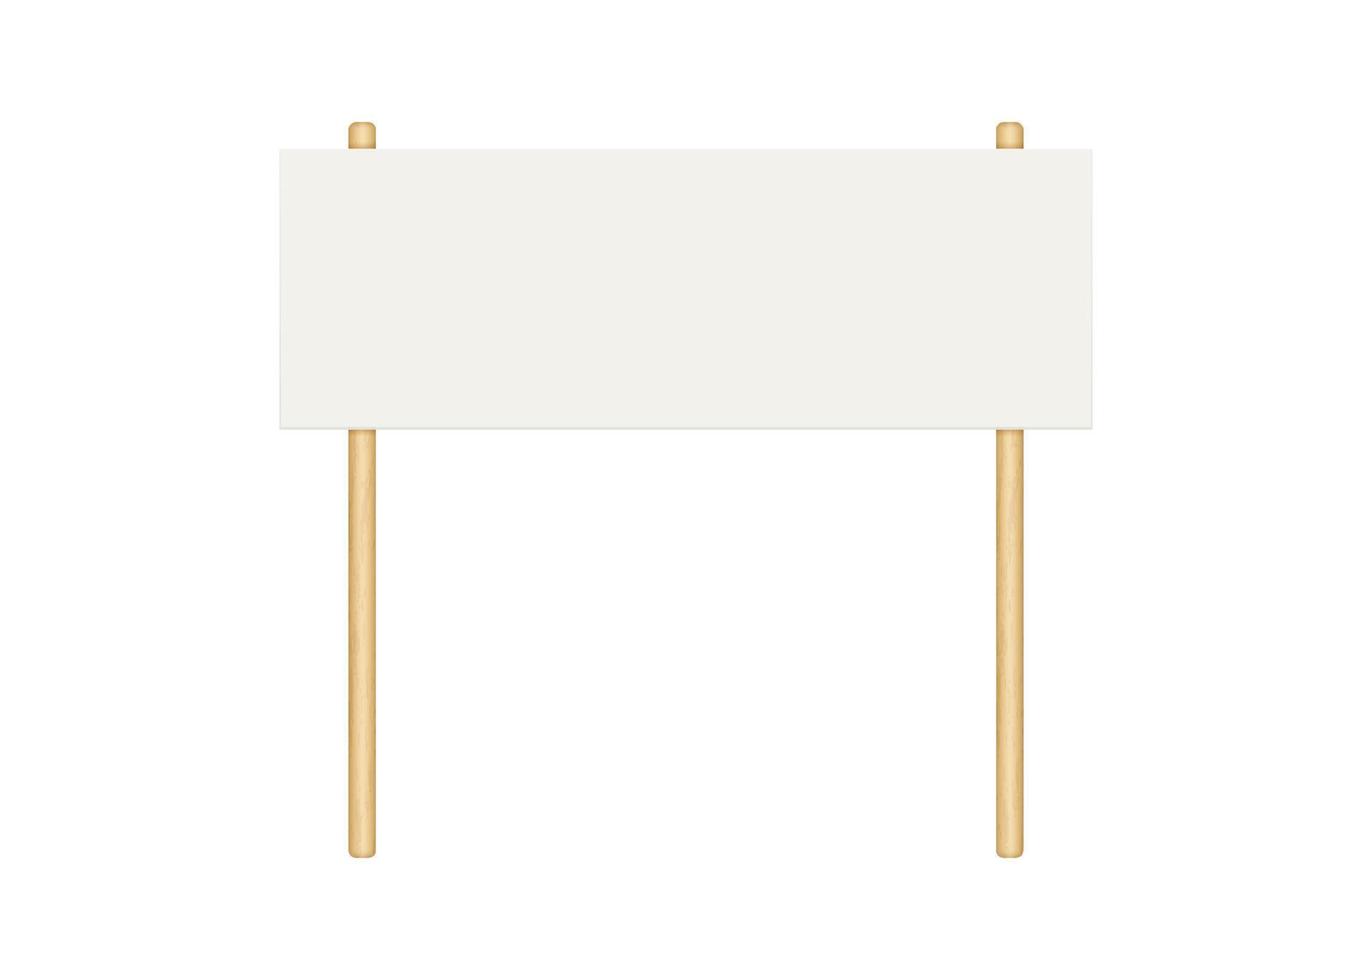 Picket banner frame. Blank demonstration banner mock up. Empty protest placard with wooden poles. Realistic politic strike board mockup. Vector illustration isolated on white background